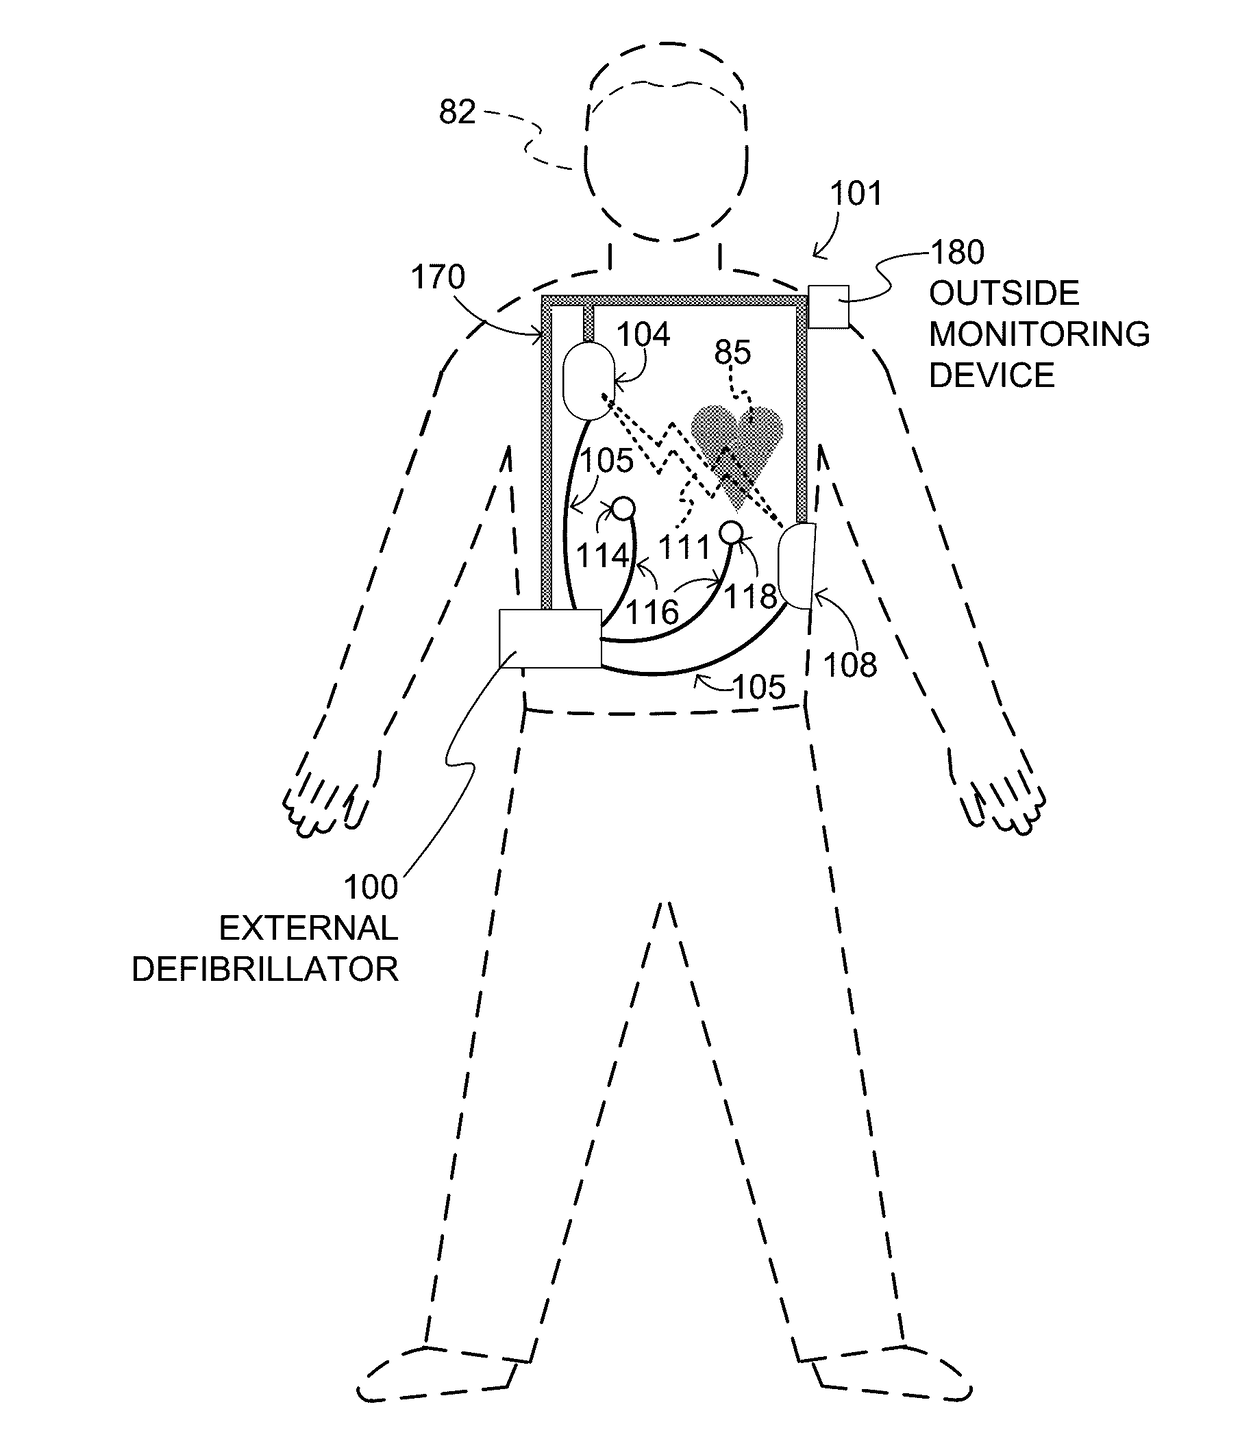 Wearable cardioverter defibrillator (WCD) system with isolated patient parameter component